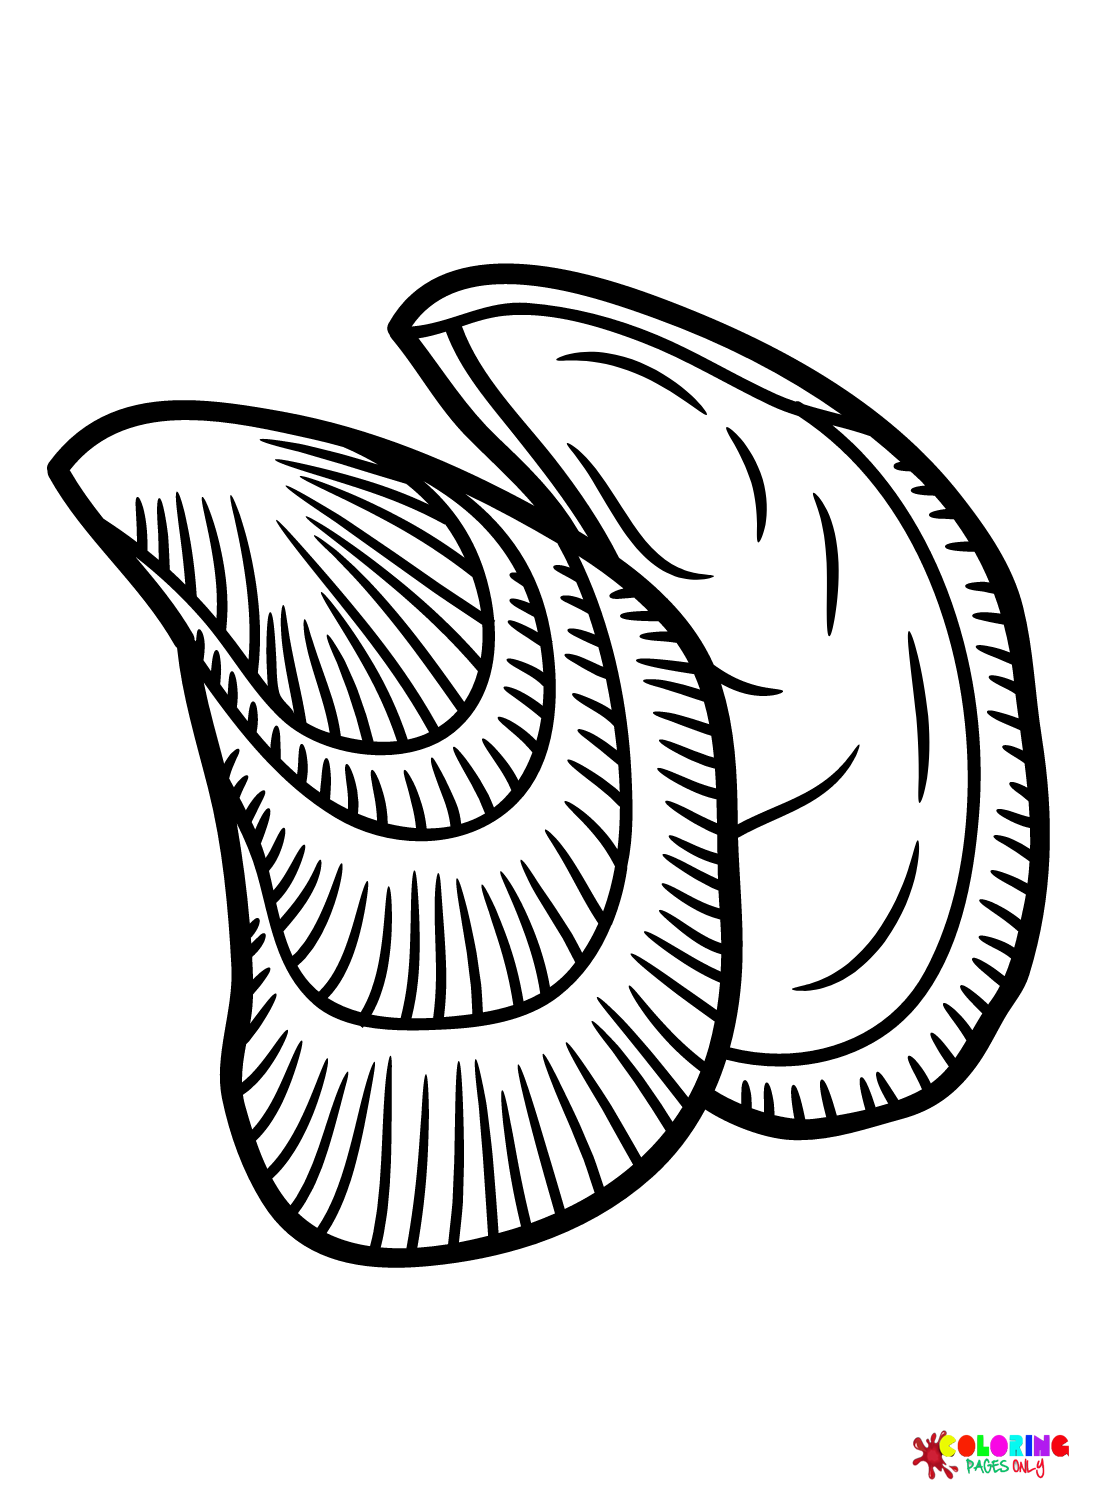 Hooked Mussel Coloring Page